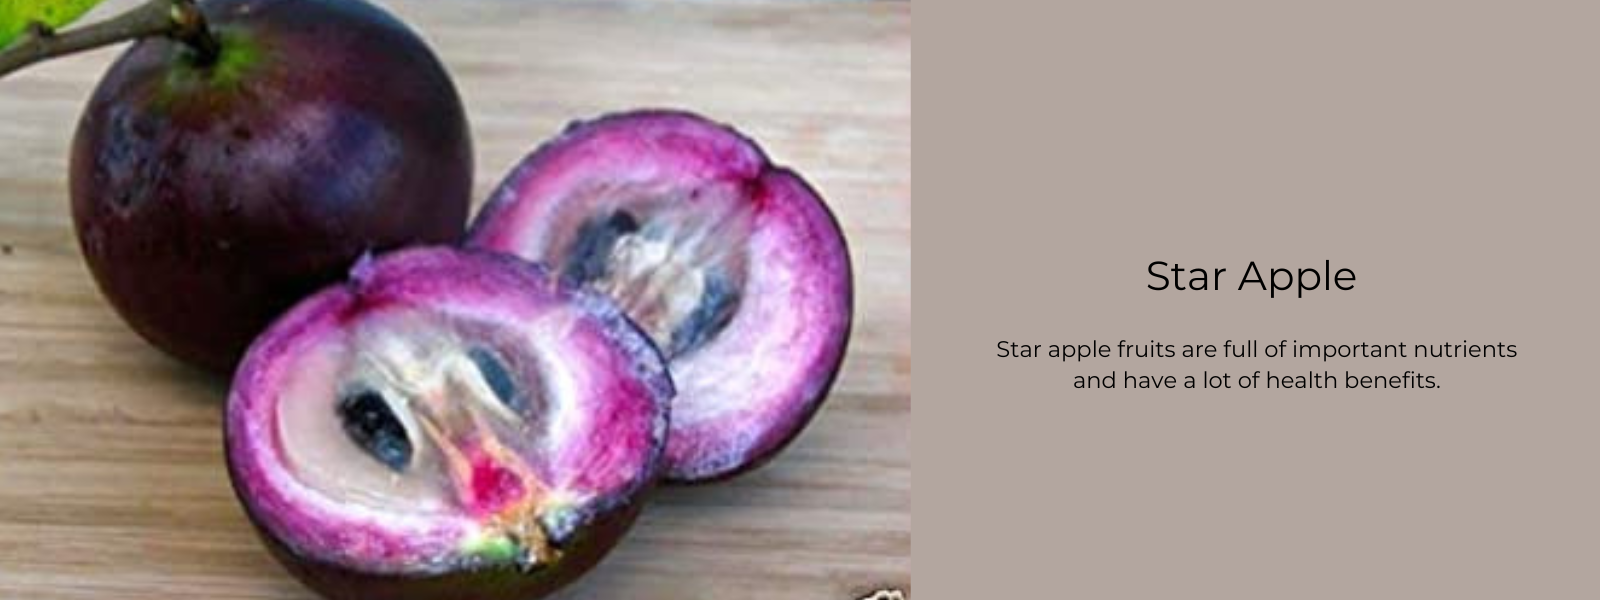 Star Apple - Health Benefits, Uses and Important Facts